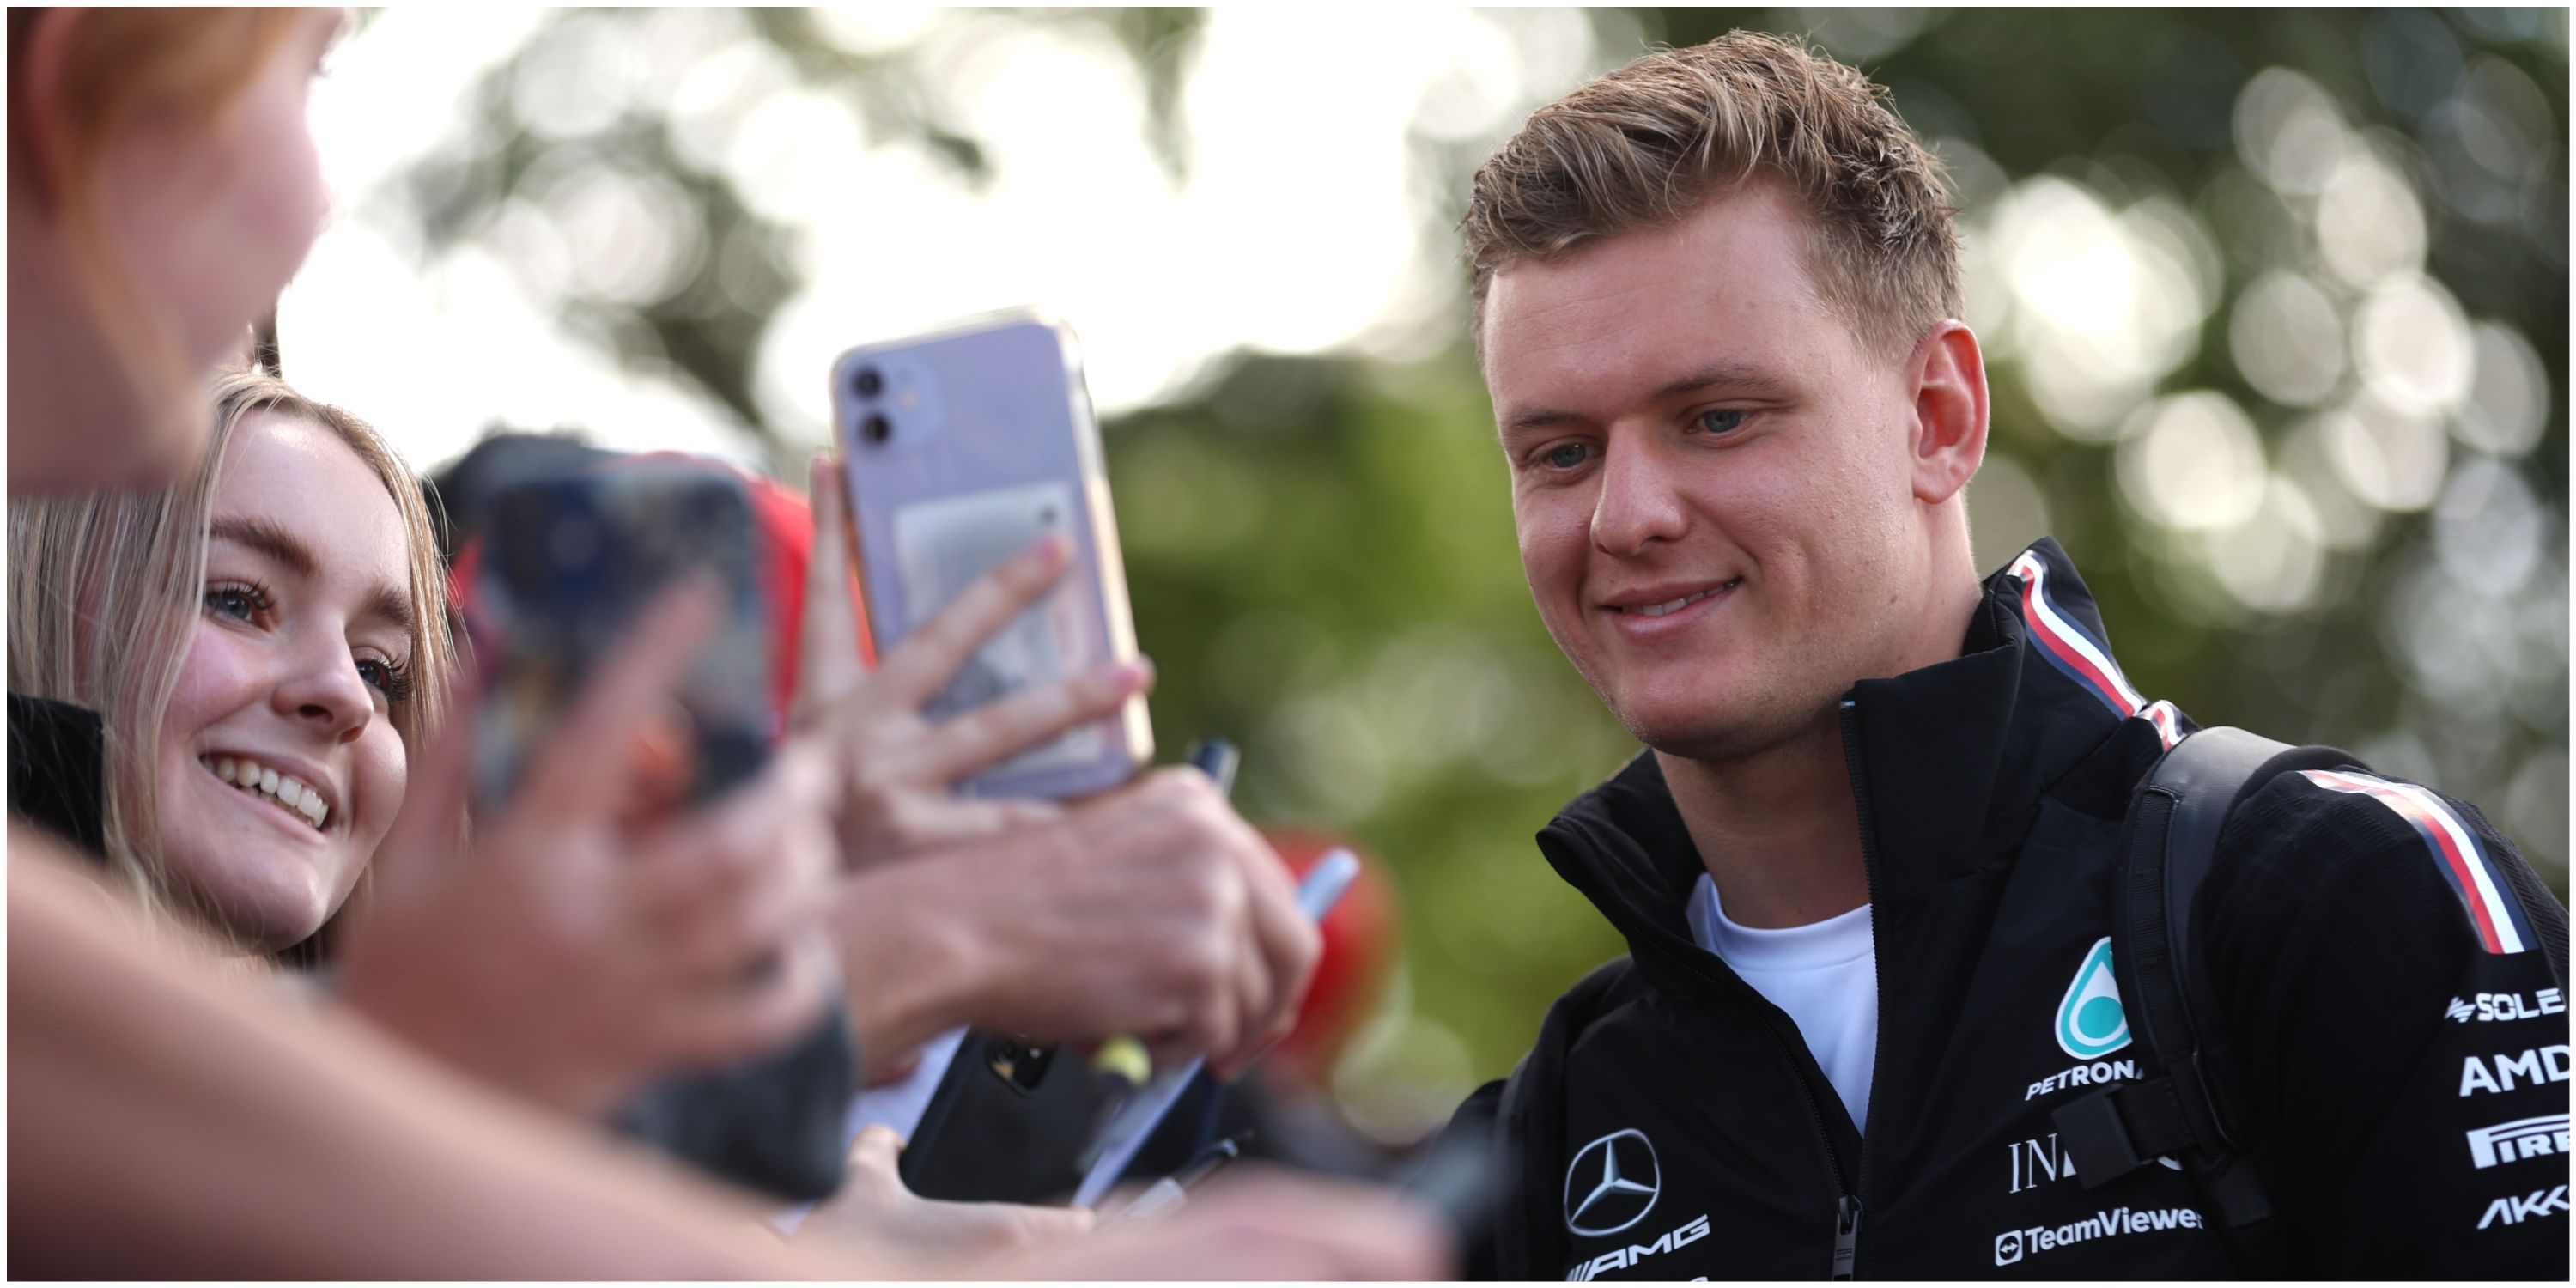 Mick Schumacher with fans at the Australian GP